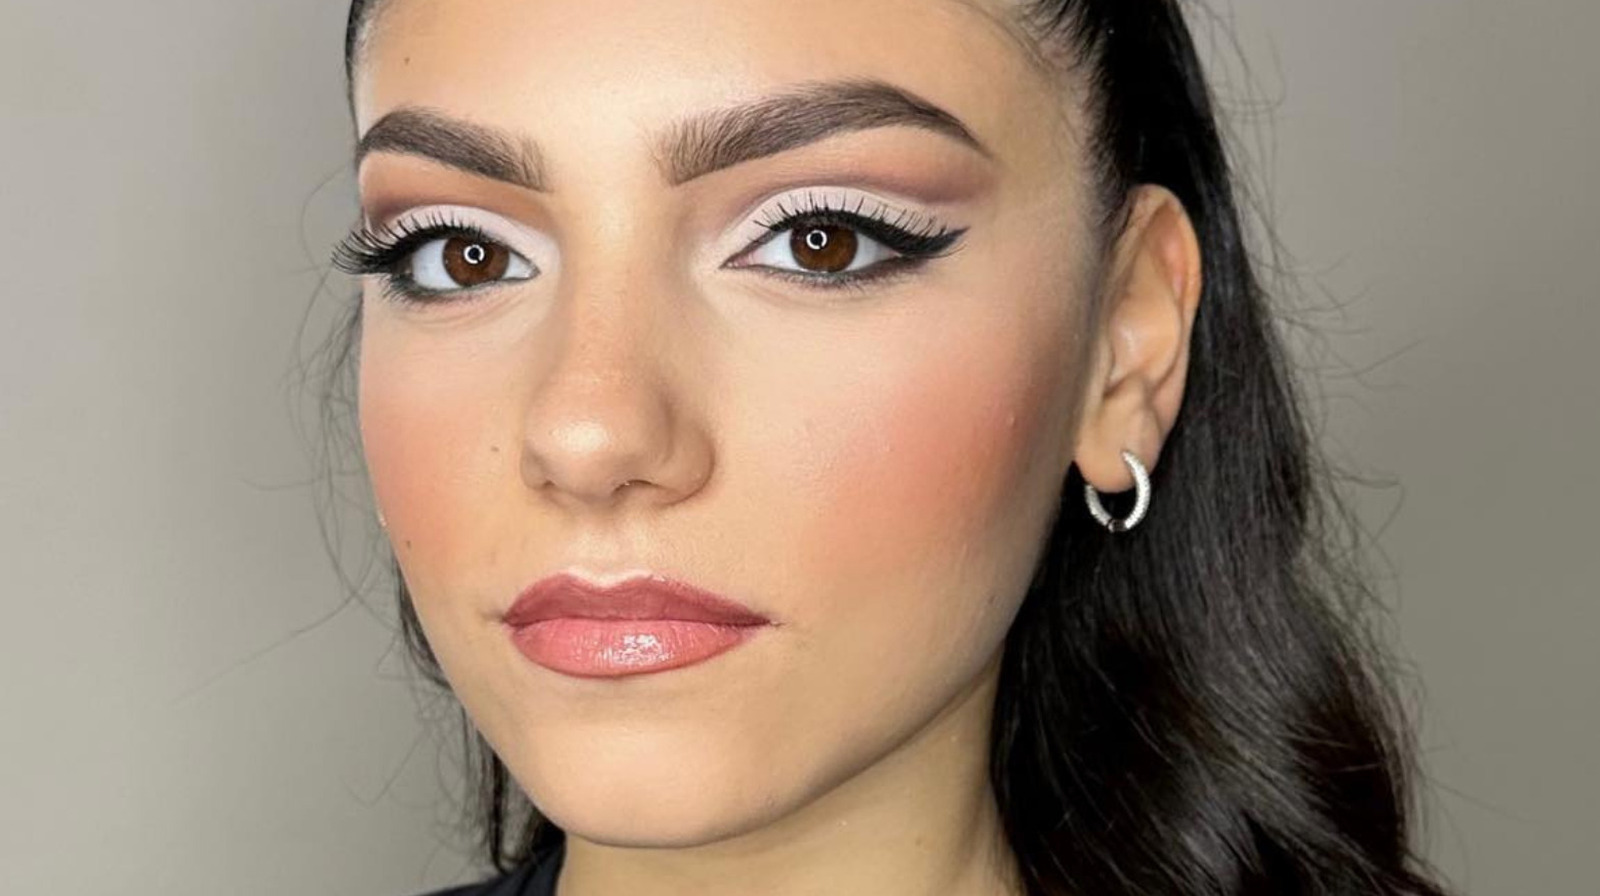 The Cut Crease Is The Ideal Look For Almond-Shaped Eyes - Here's Why